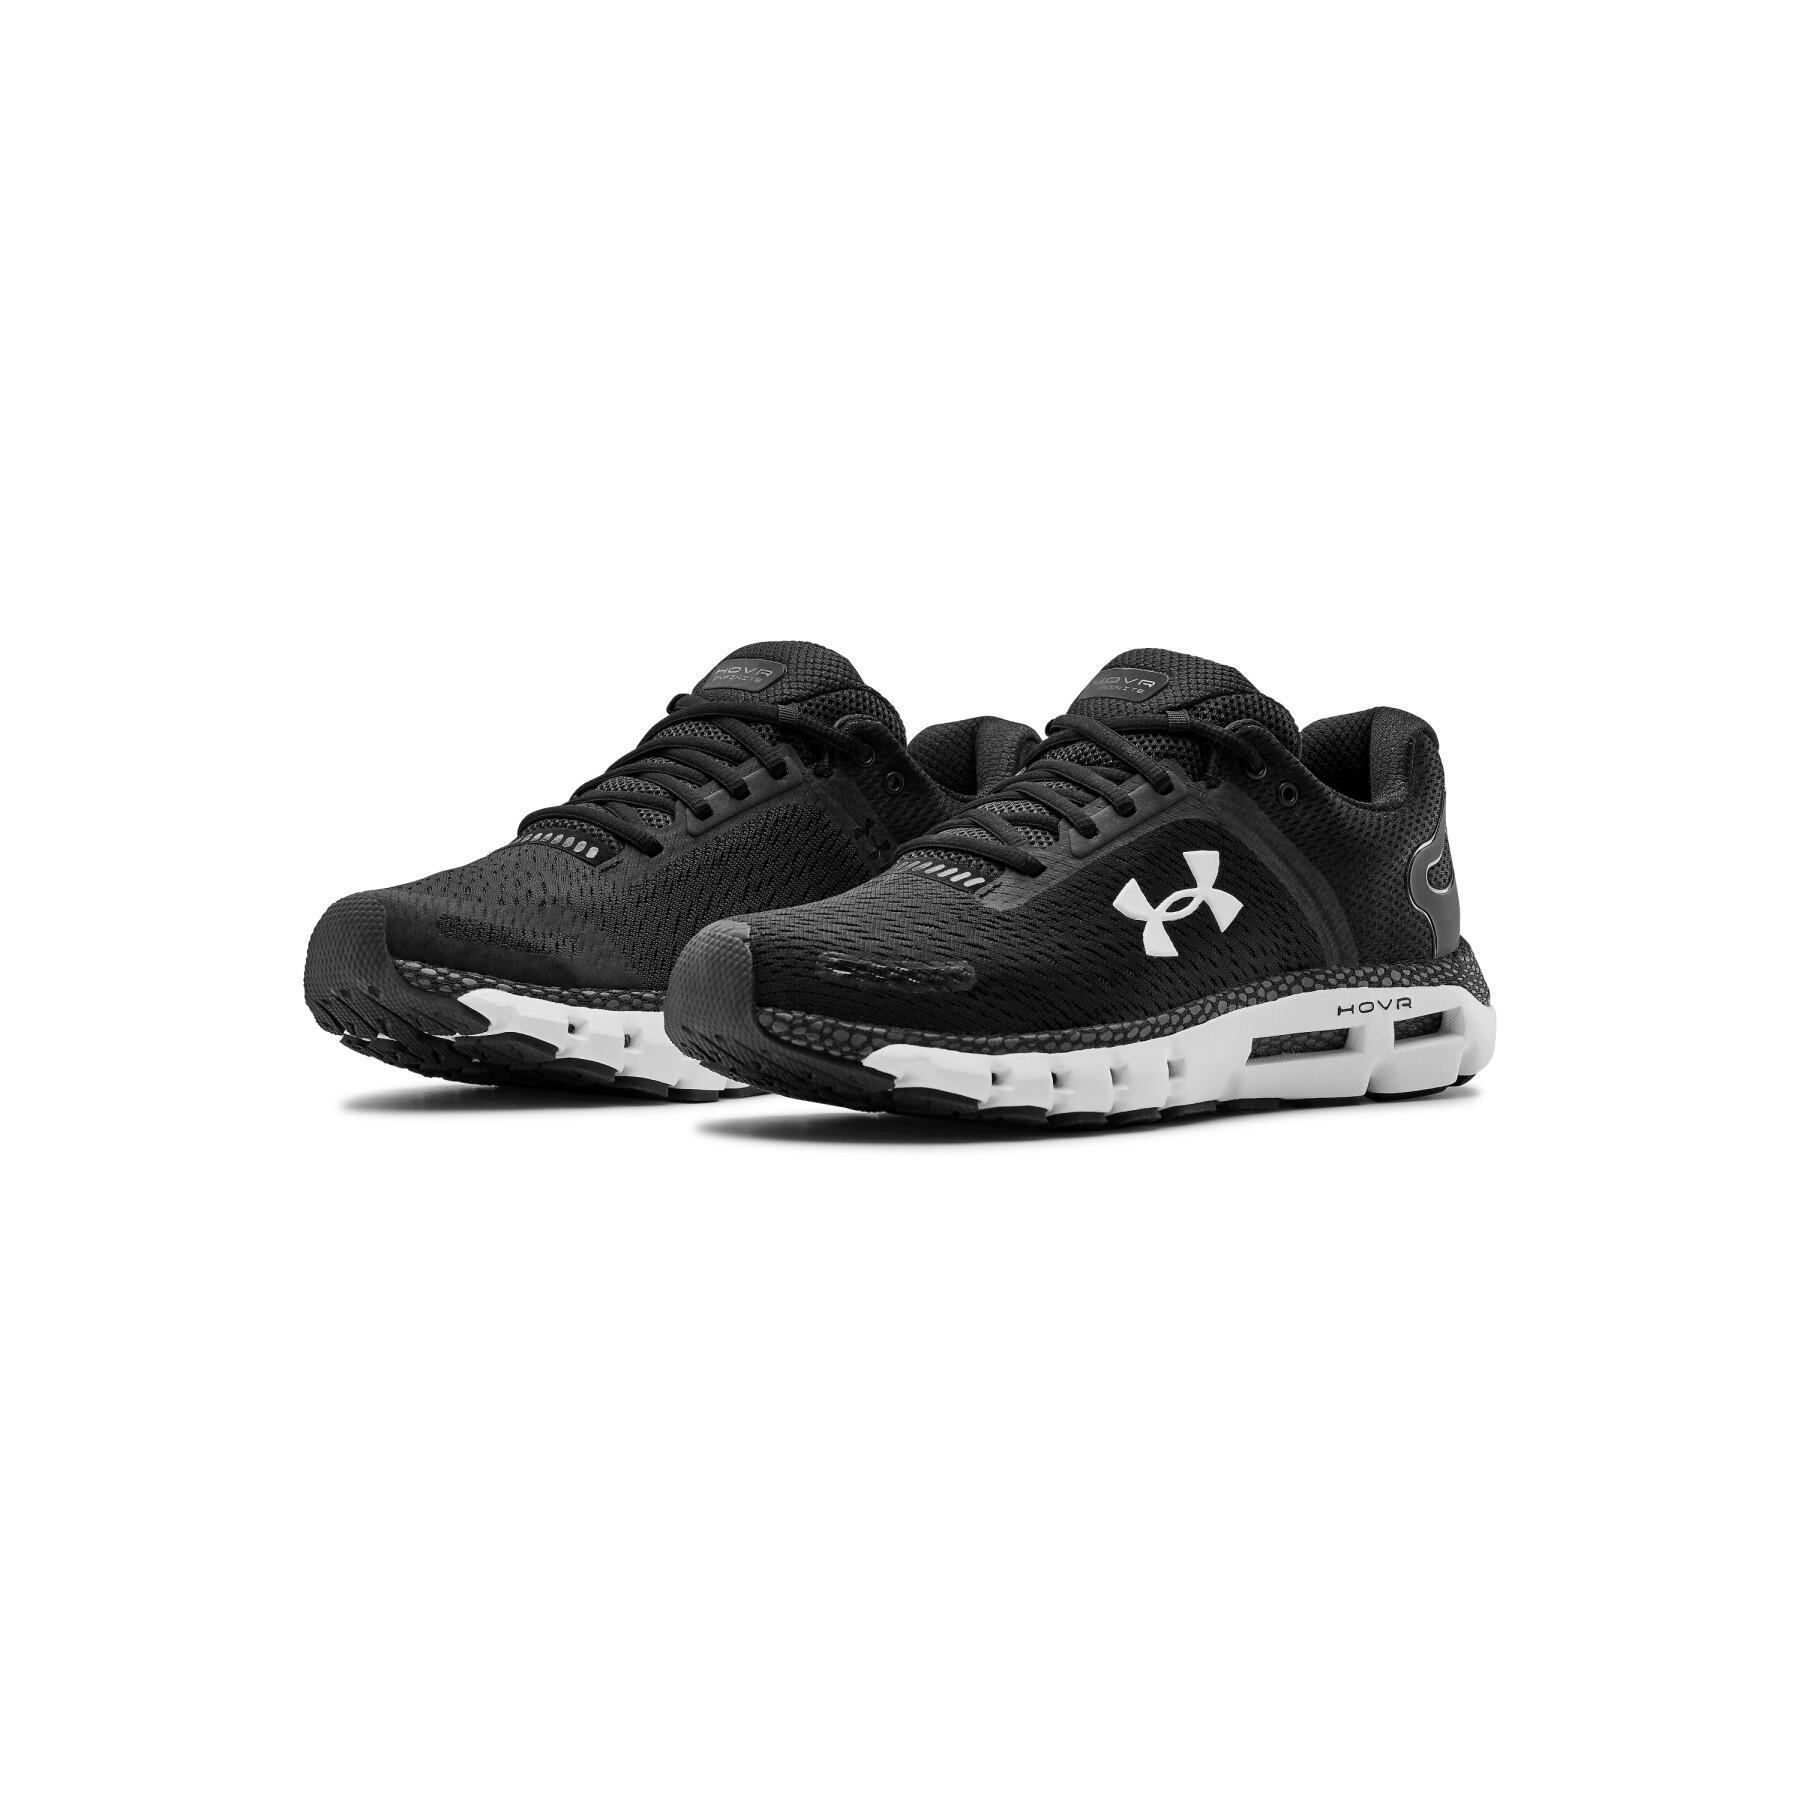 Shoes Under Armour HOVR™ Infinite 2